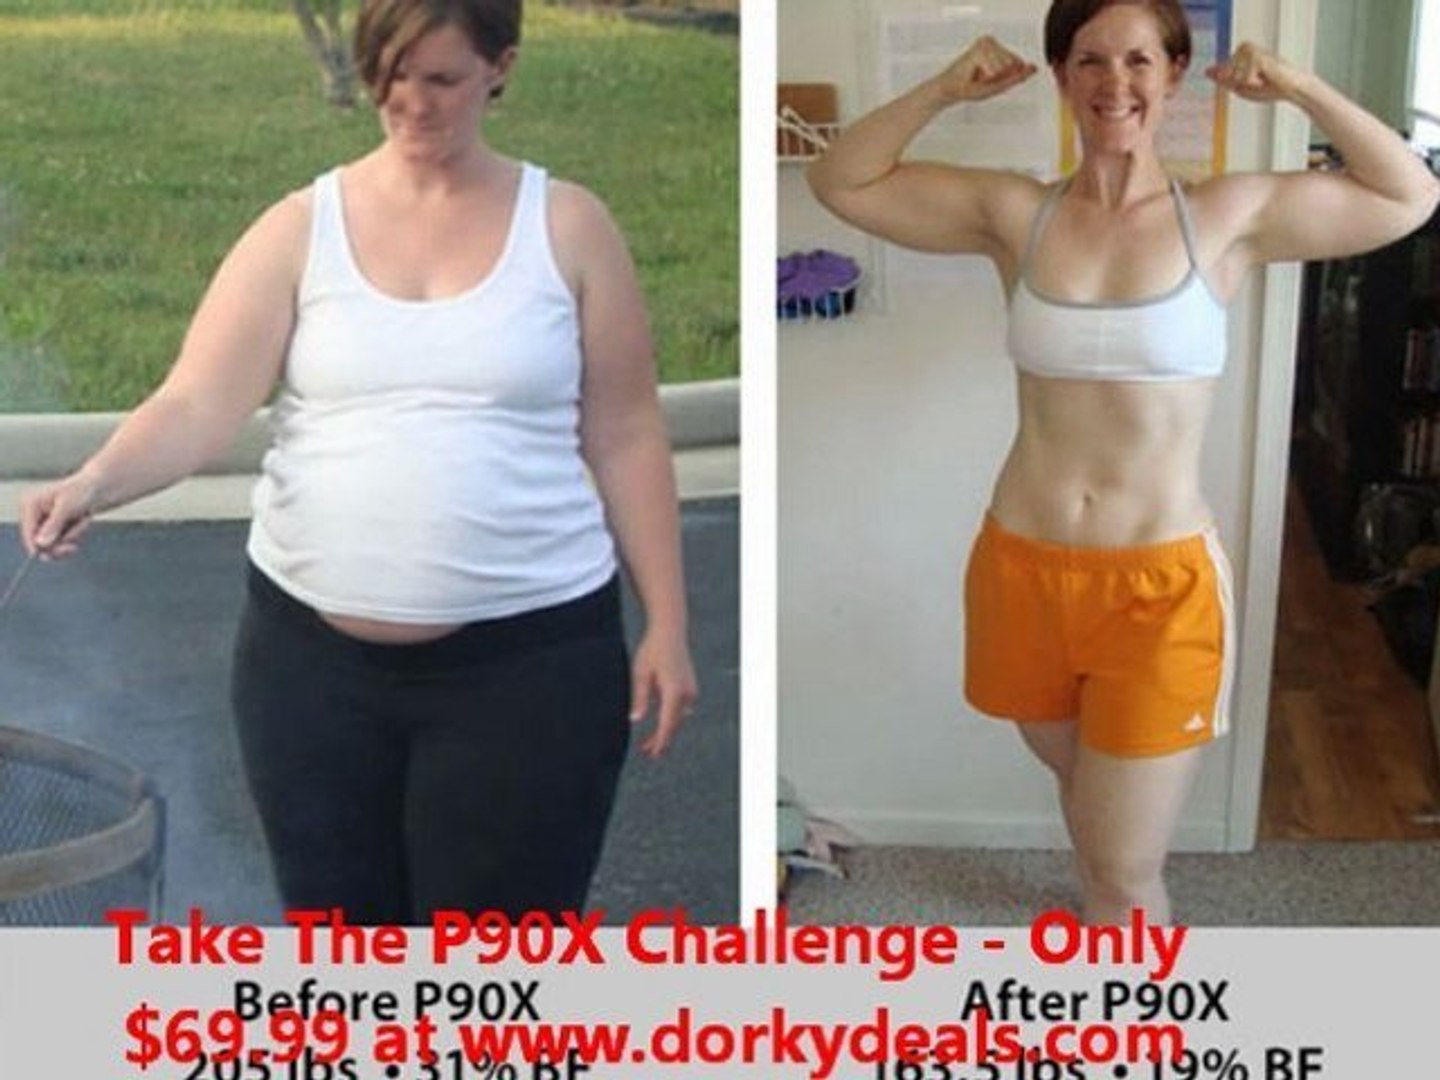 P90x Workout Routines Only 69 99 Dorkydeals Com Video Dailymotion